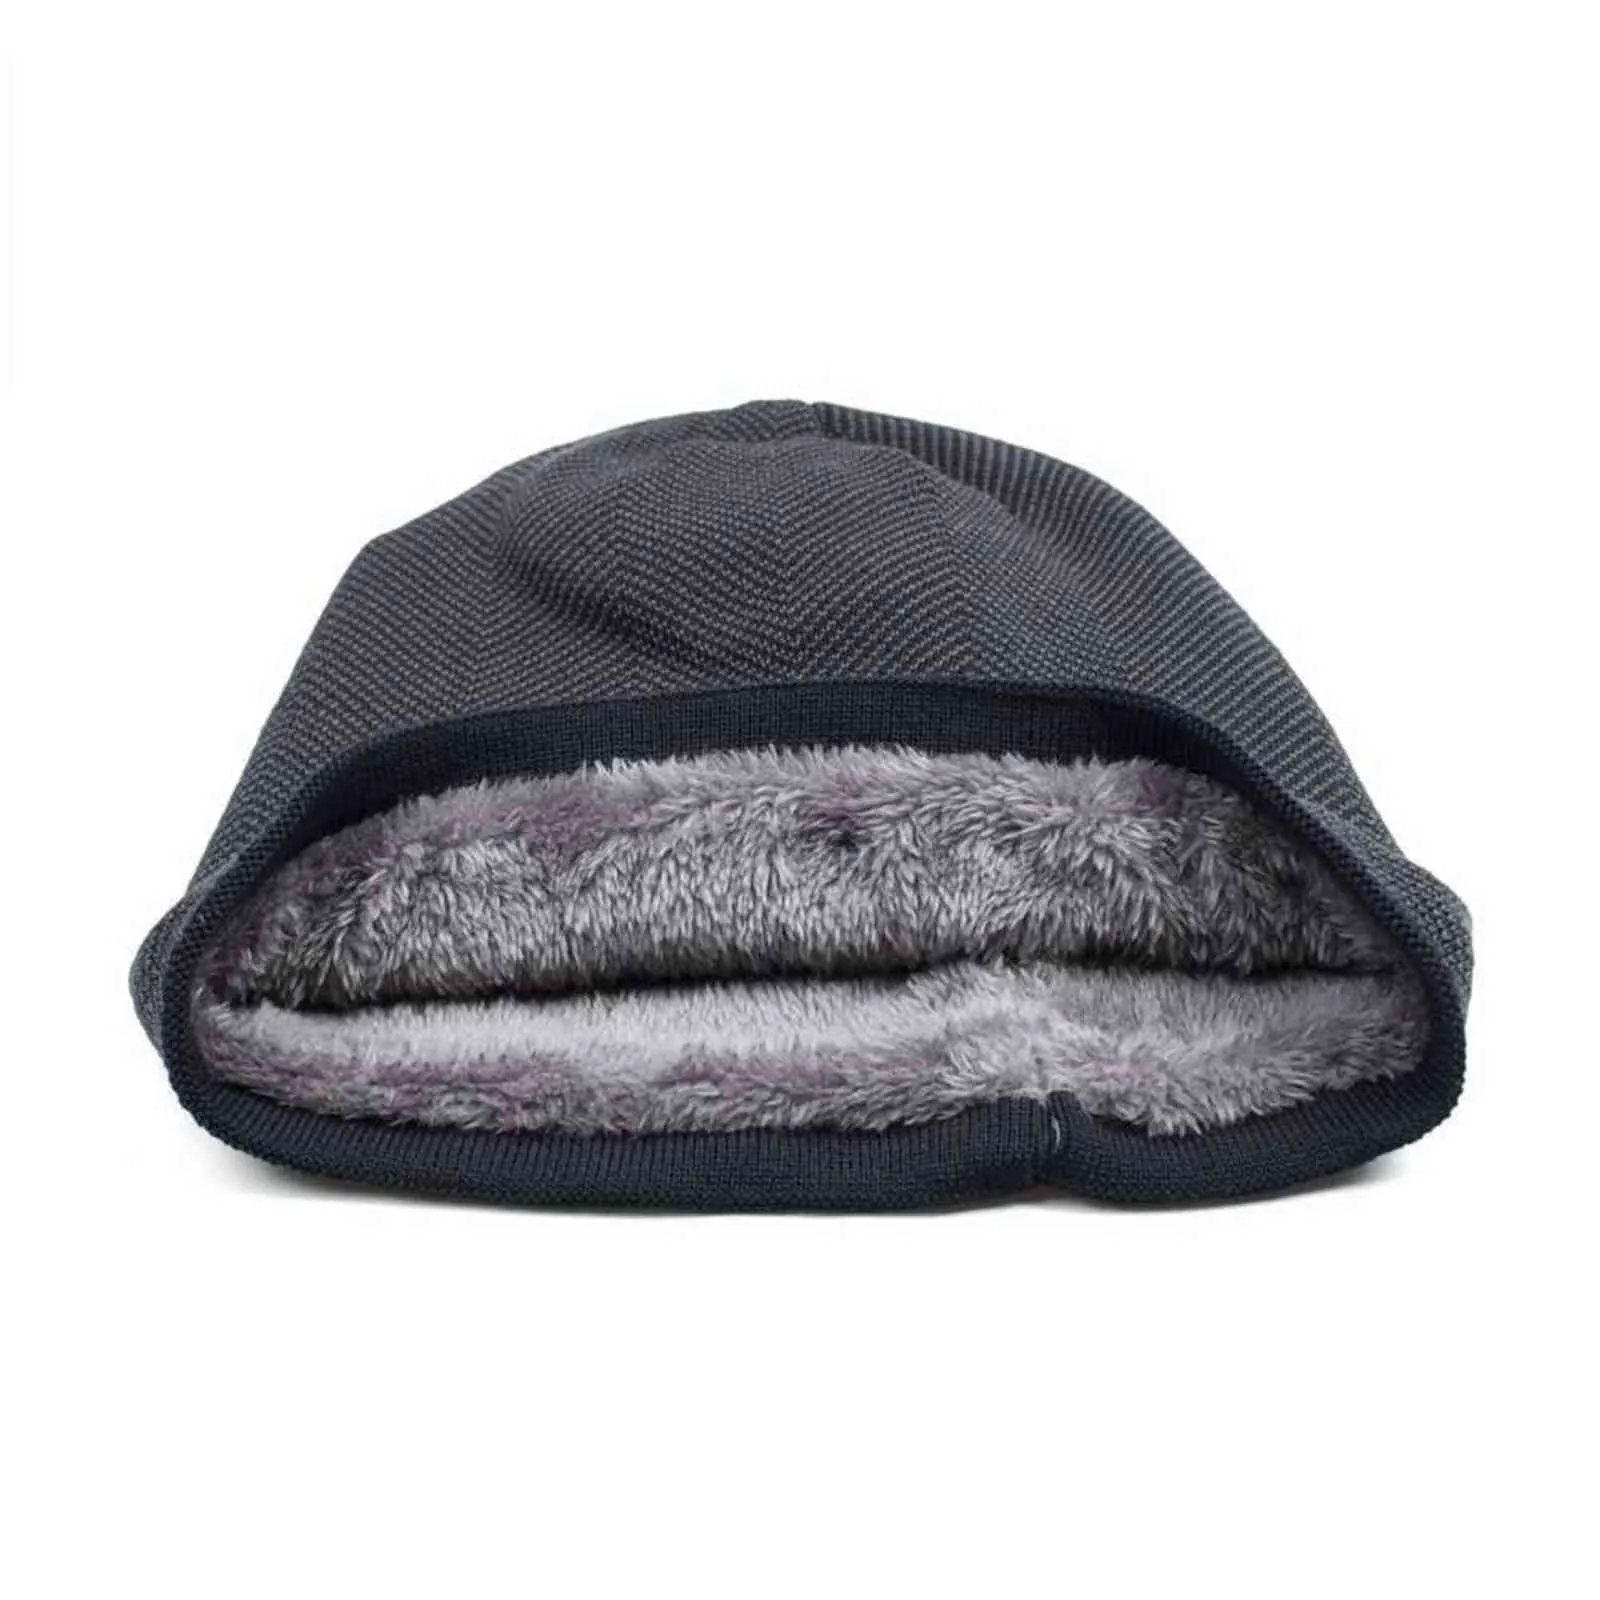 Casual Fleece Lined Thick Baggy Men's Beanie Hat Skull Cap Winter Warm Hat Cable Knit Hat Y21111